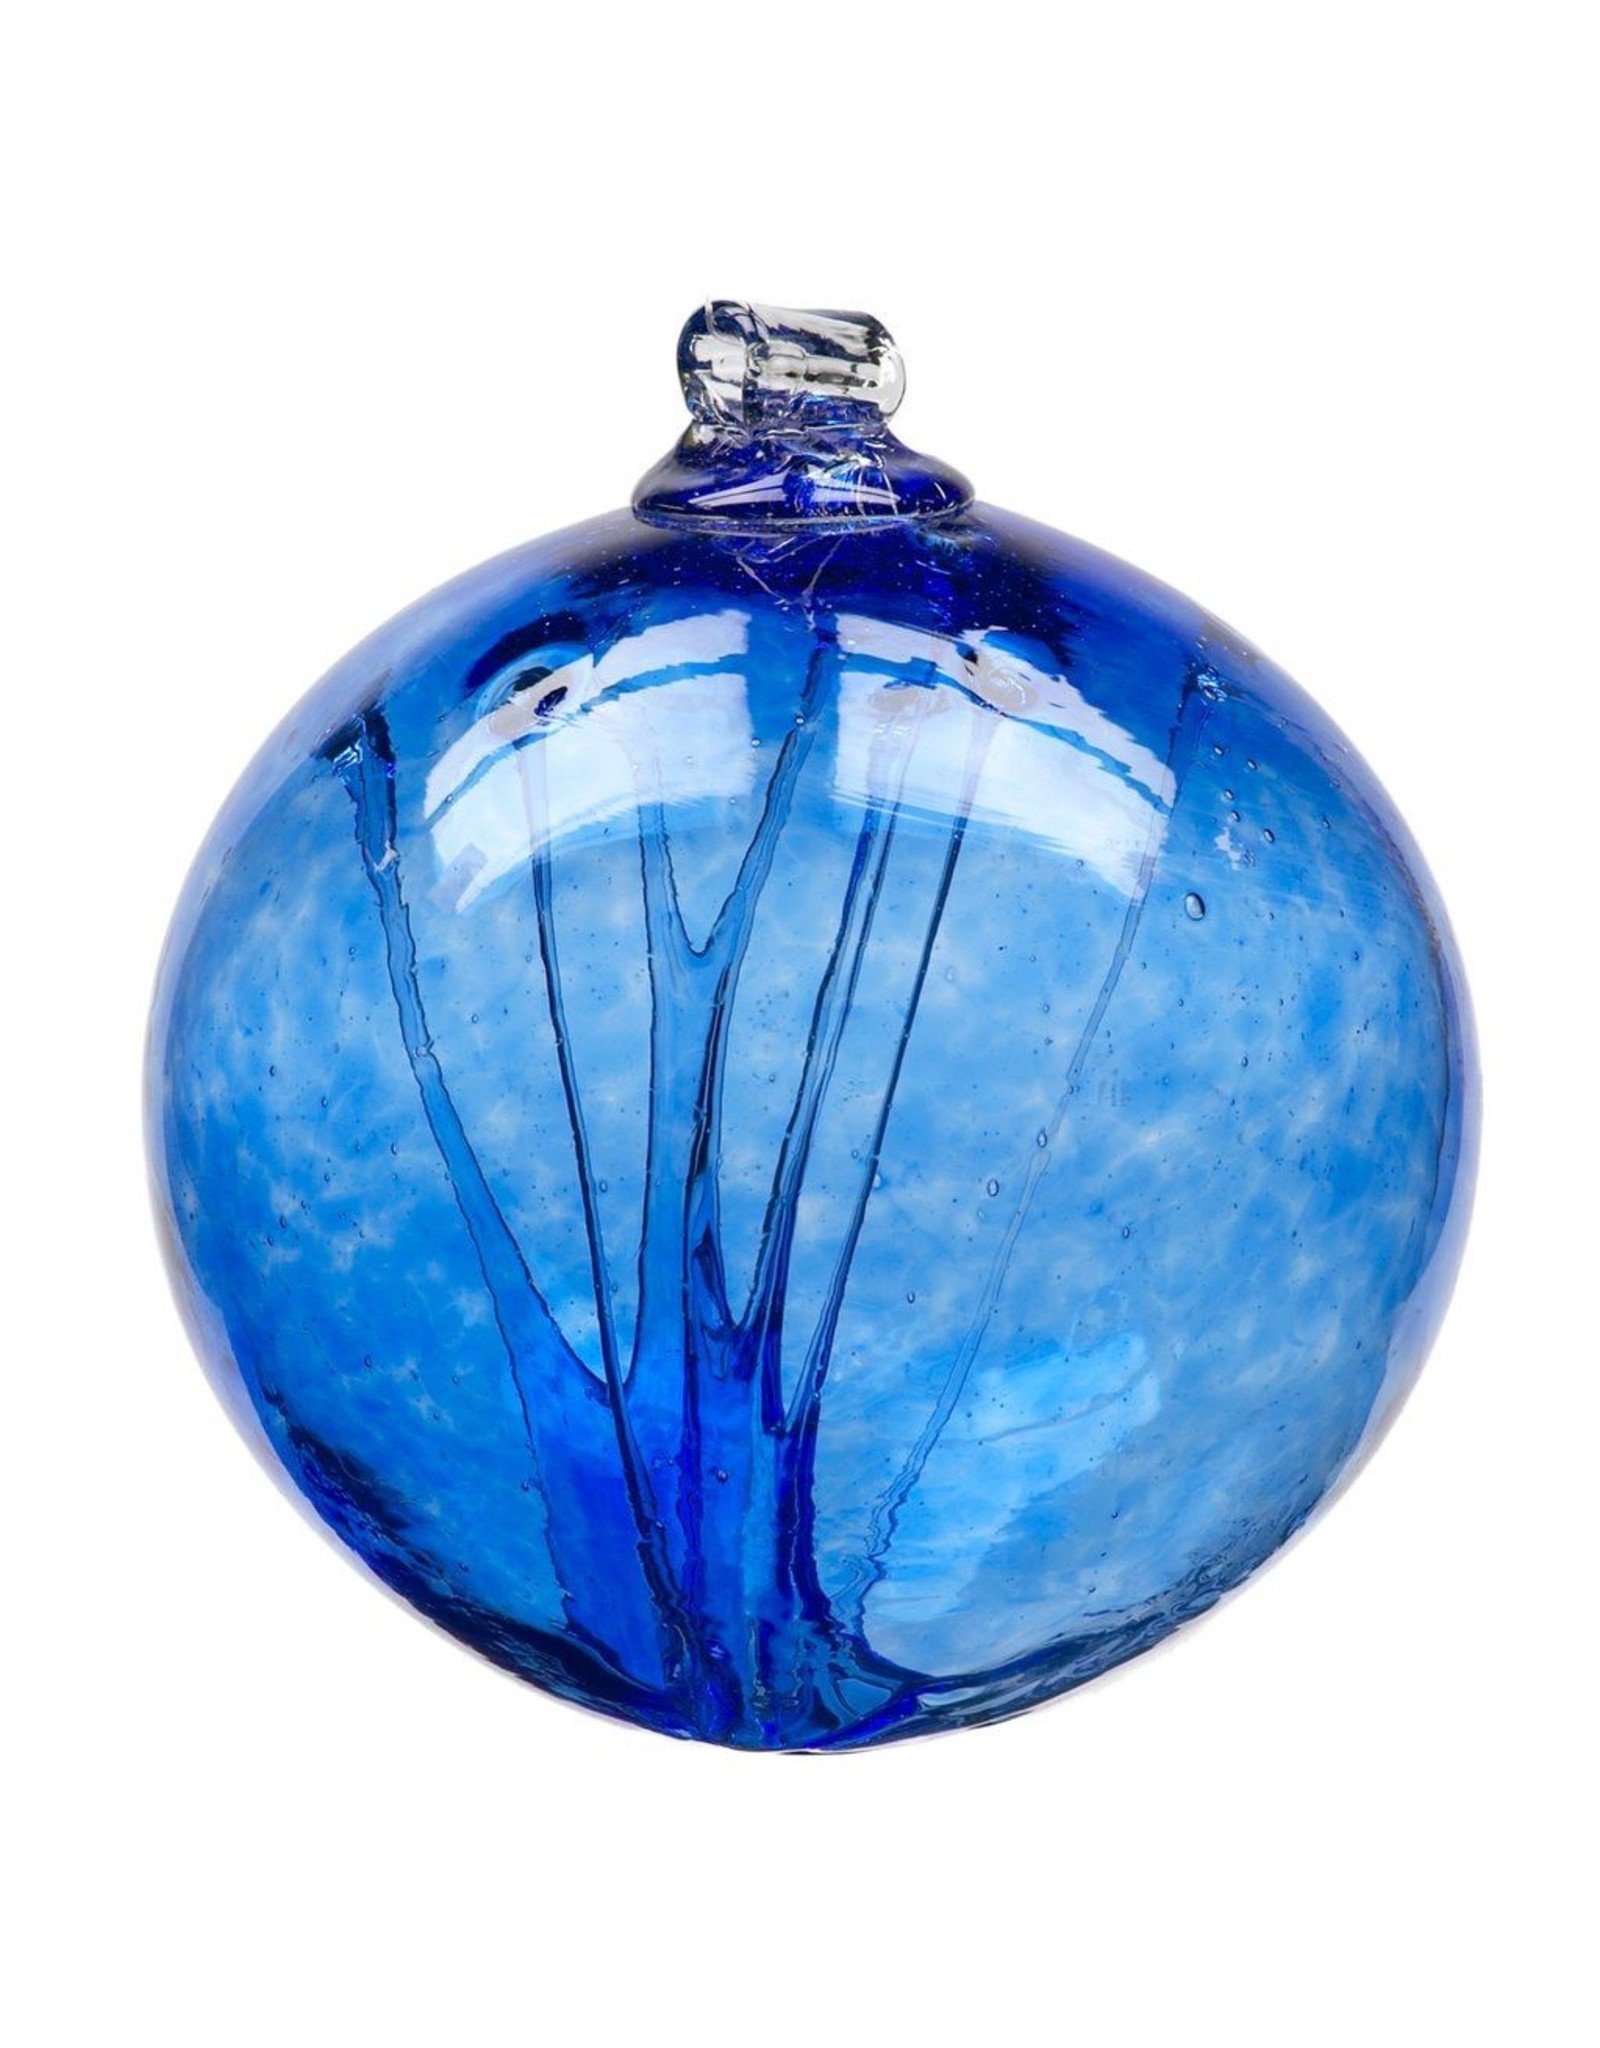 6" Olde English Witch Ball-Cobalt